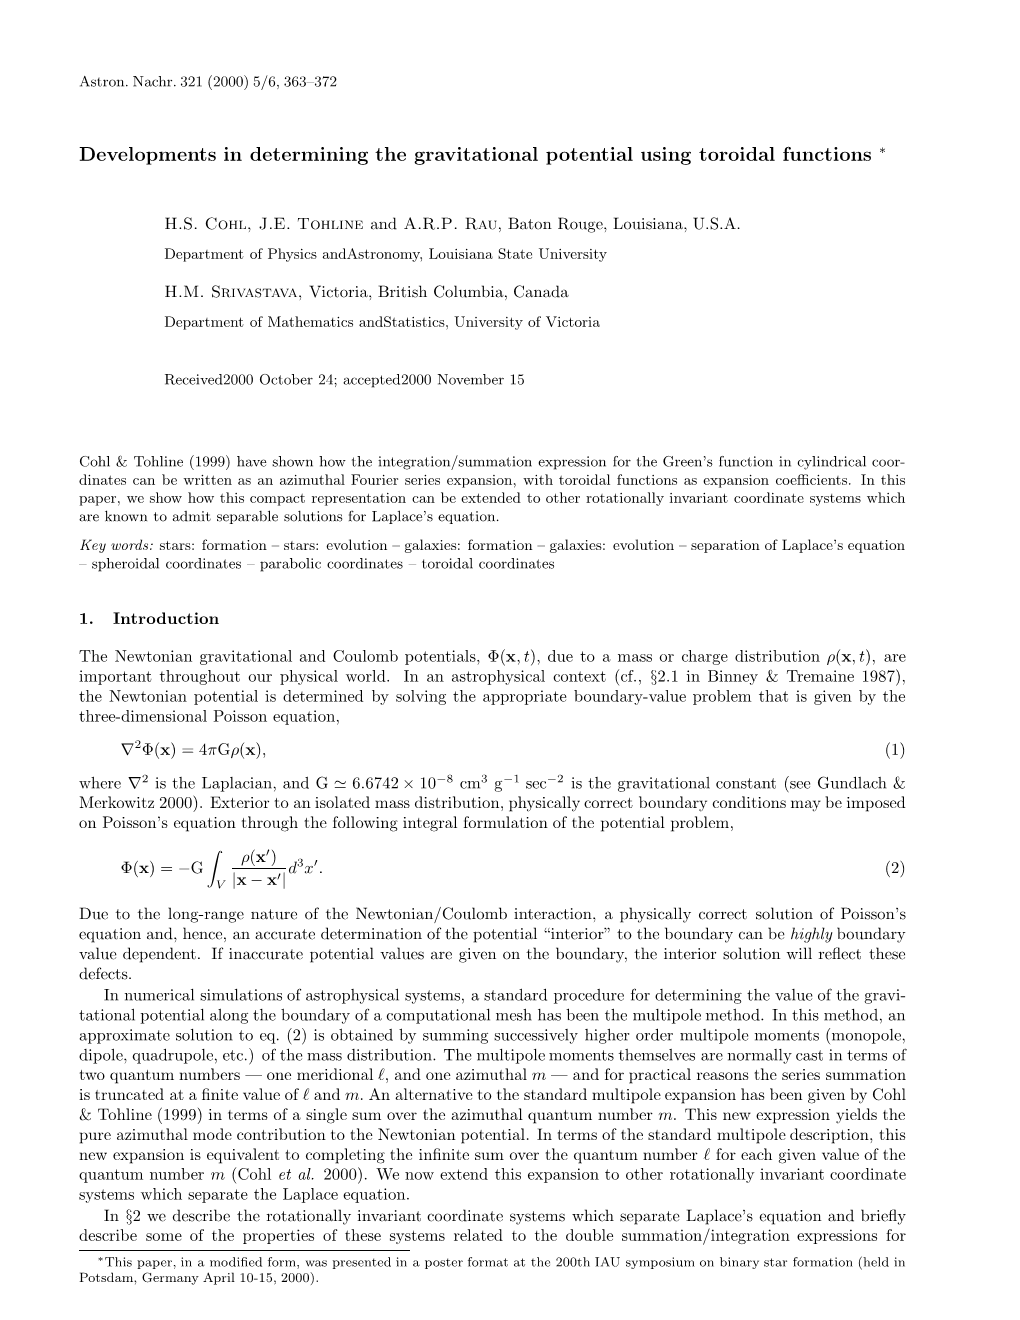 Developments in Determining the Gravitational Potential Using Toroidal Functions ∗